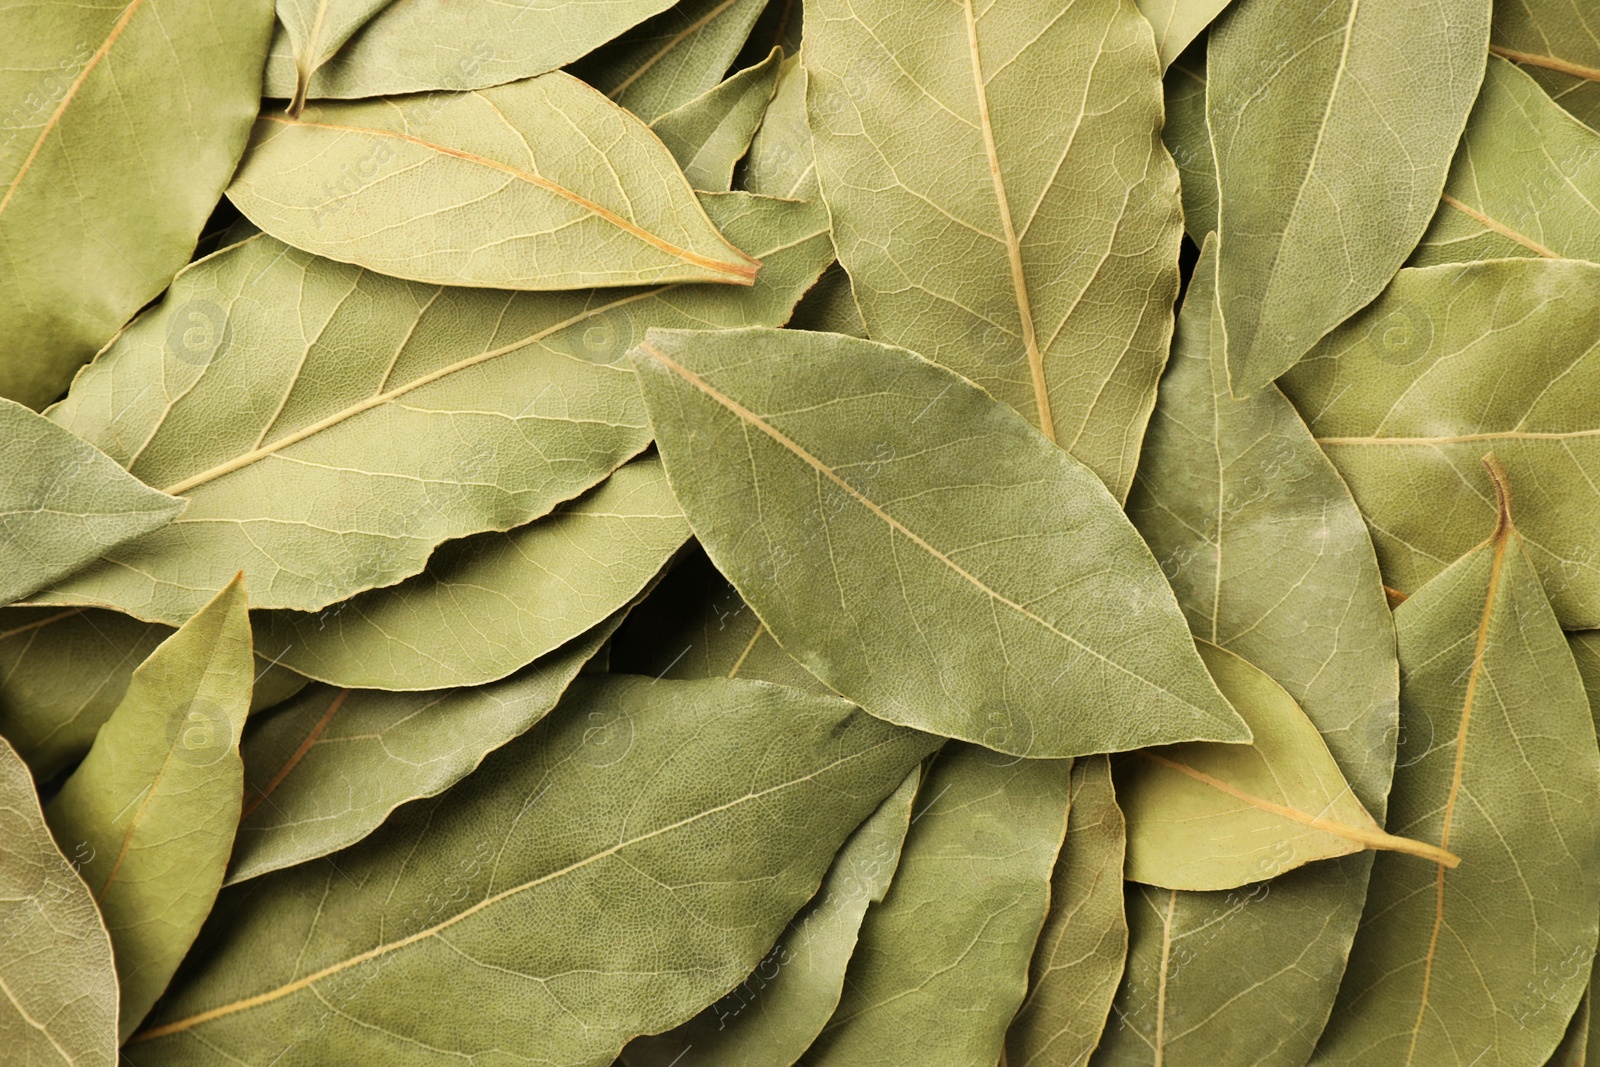 Photo of Aromatic bay leaves as background, top view